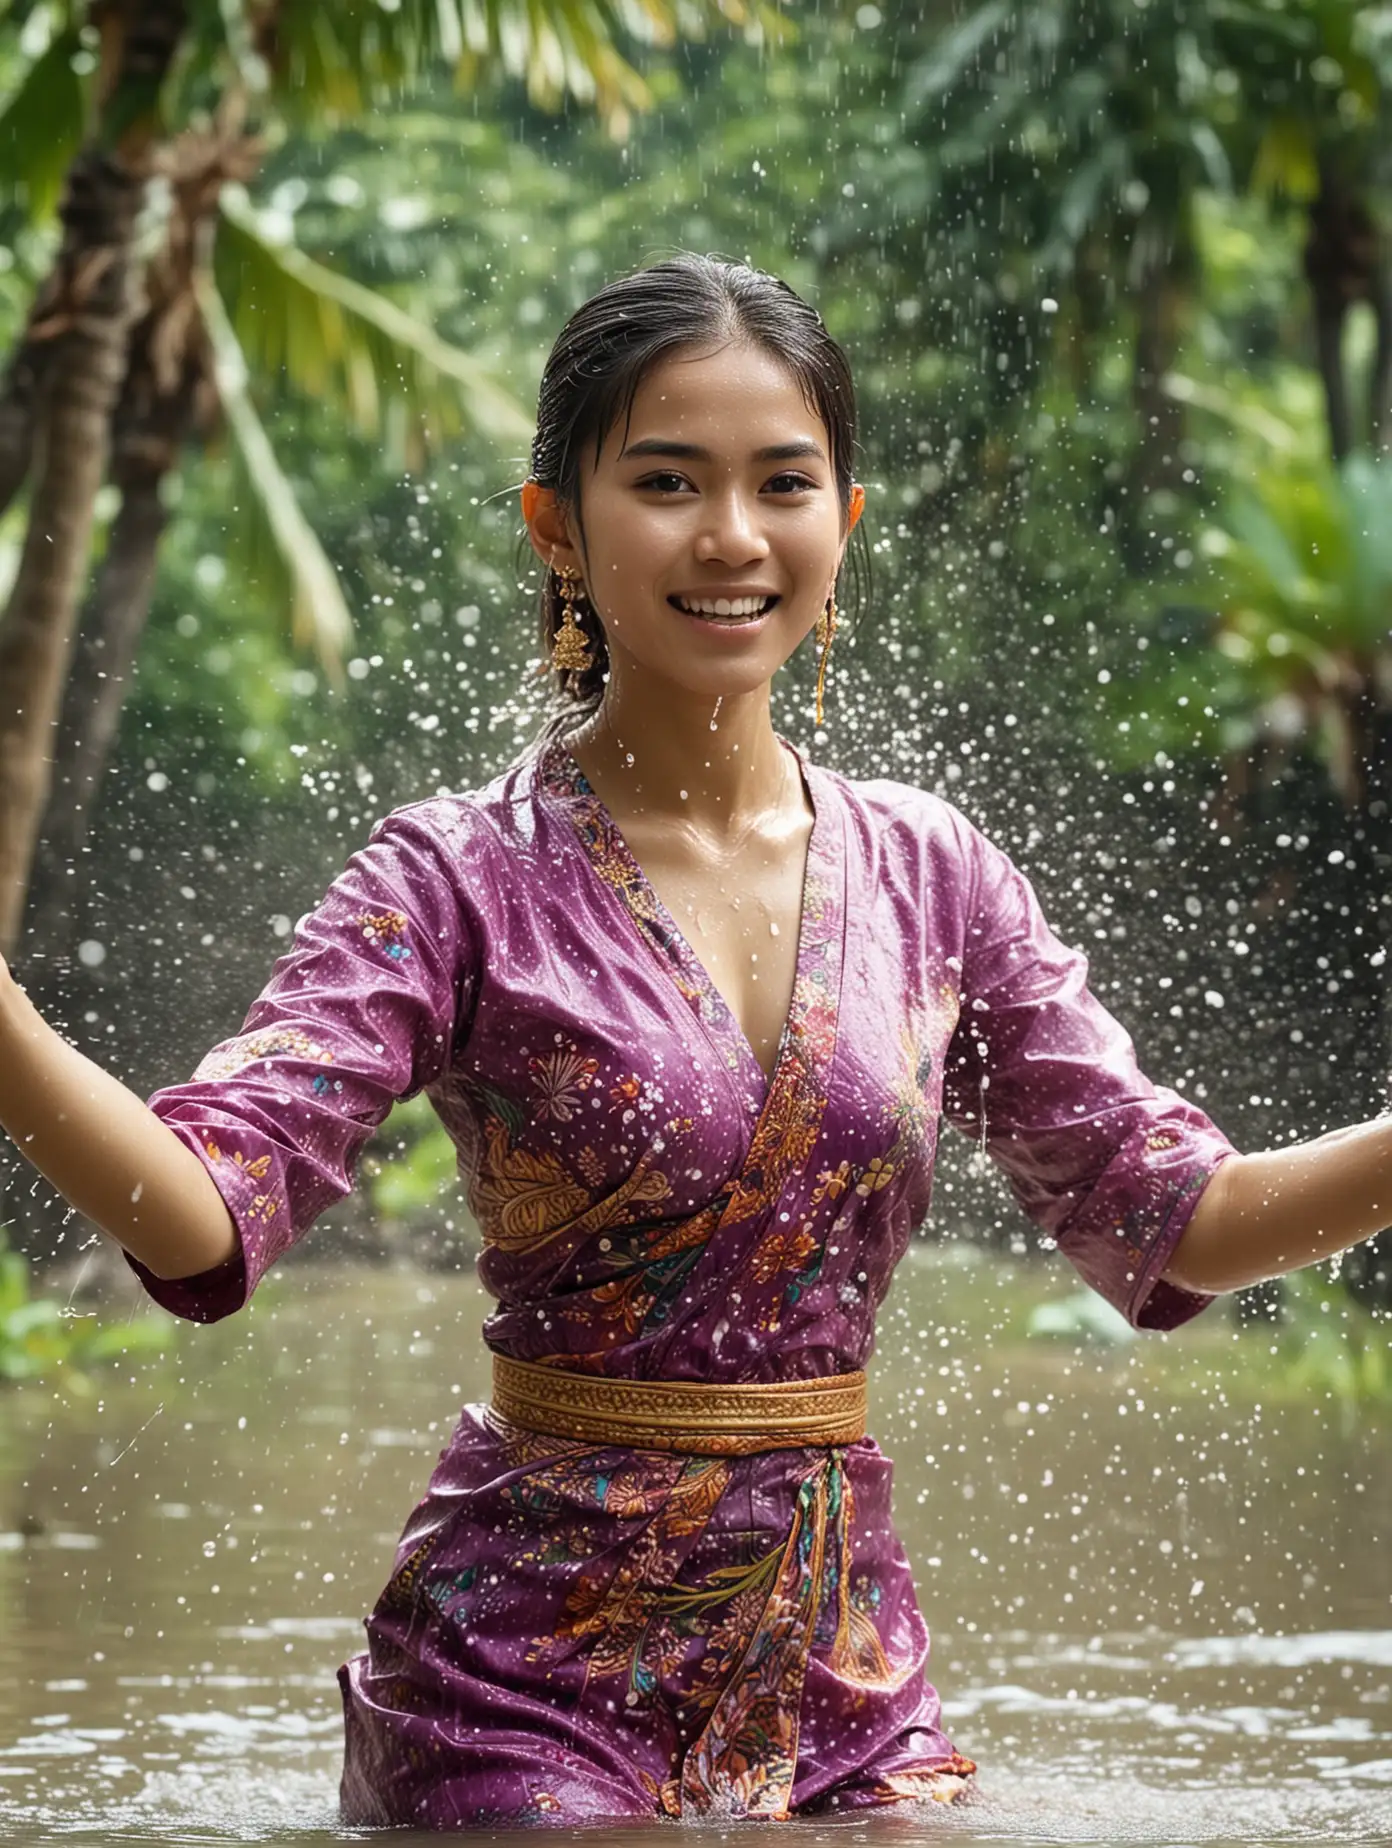 Thai girl, wearing traditional Thai clothes, covering the water splash with her hands, exquisite facial features, Thailand Songkran Festival scene, with coconut trees in the background, water splashing violently in front of the camera, strong lens sense